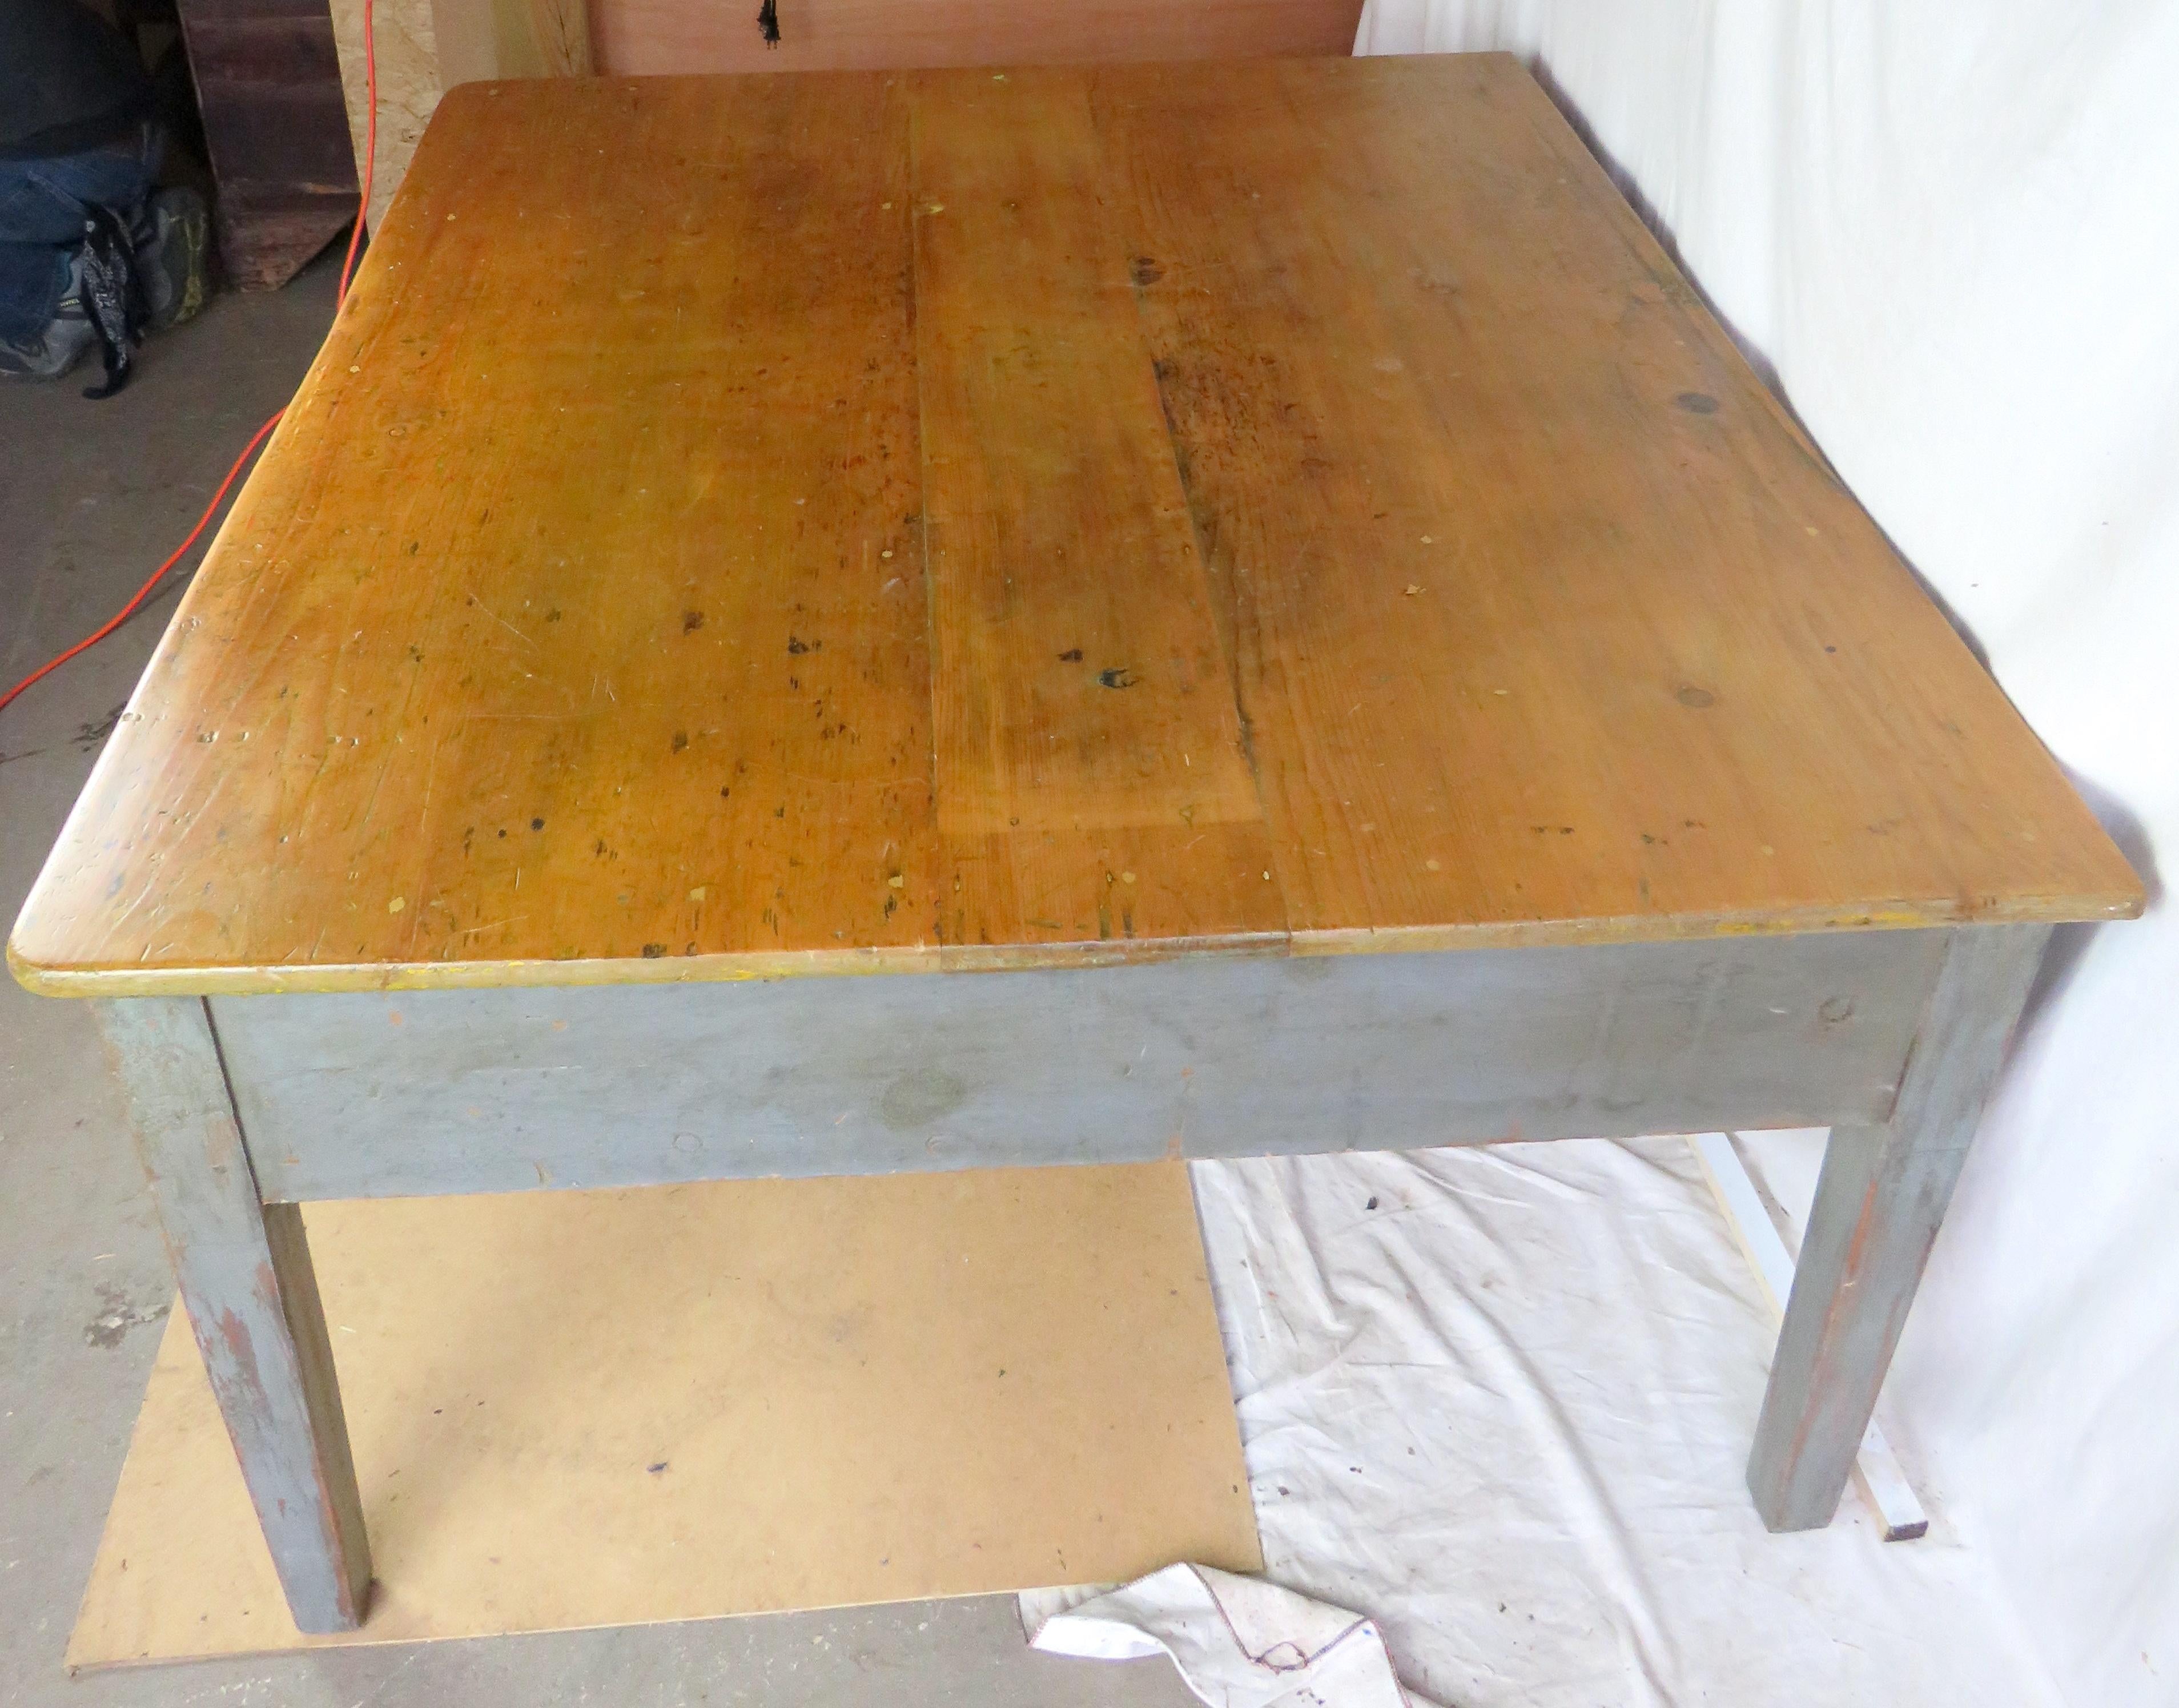 19th Century Large Desk-Table in Original Gray/Ochre Paint